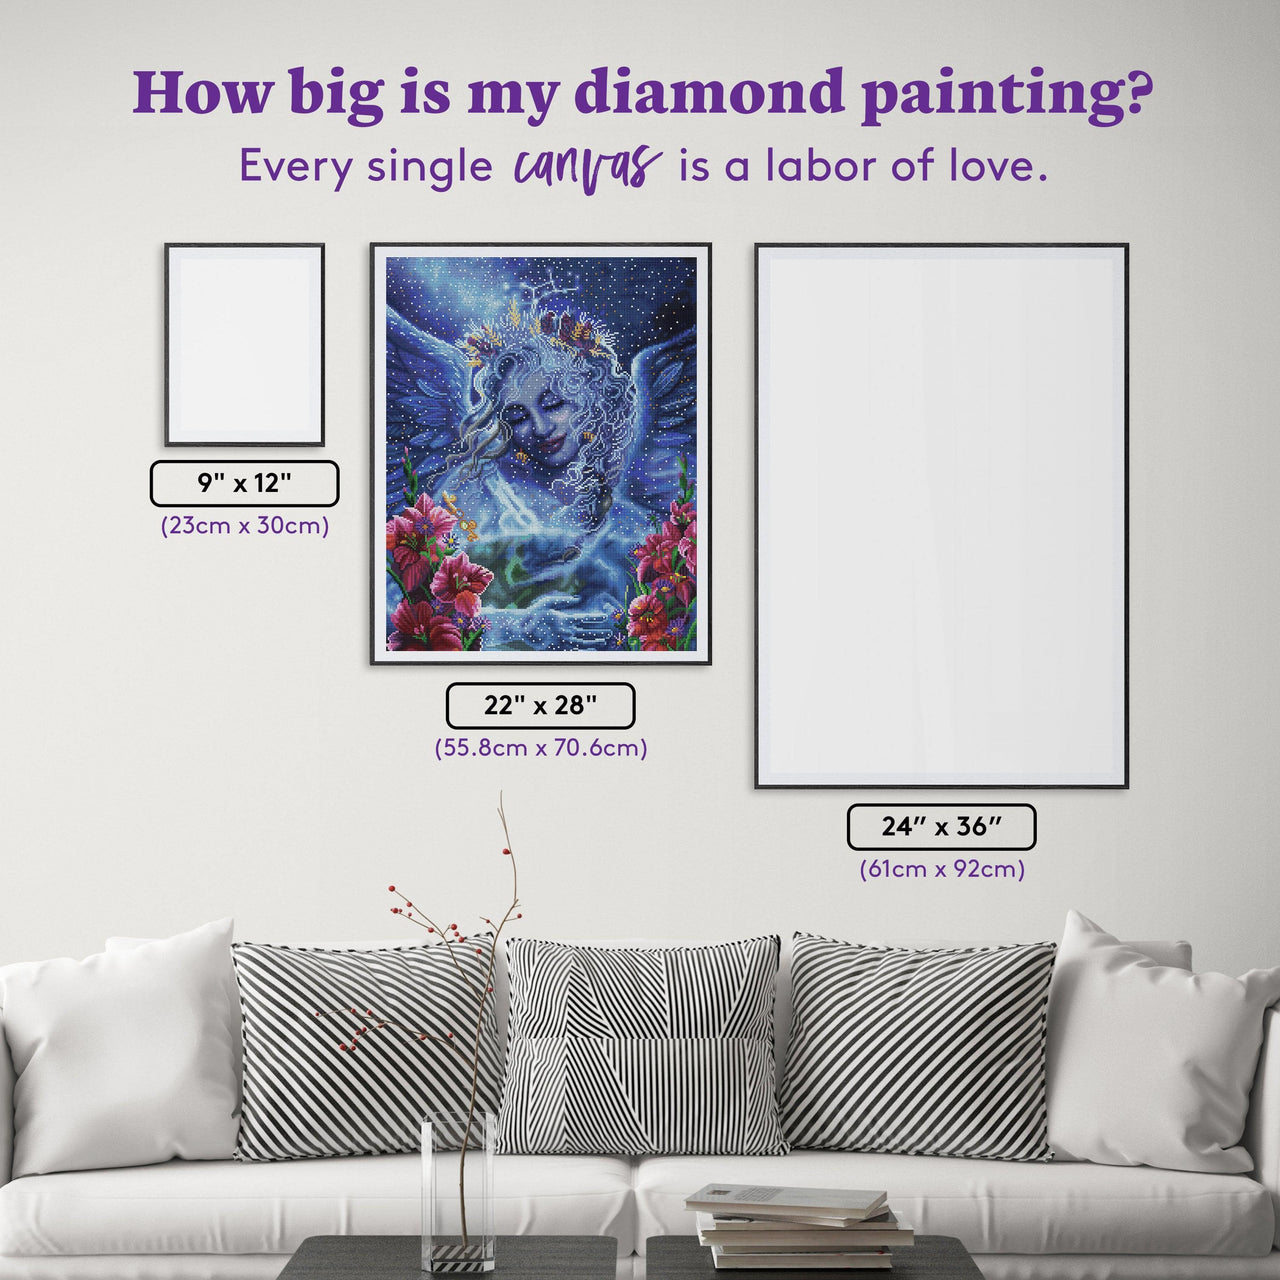 Diamond Painting Virgo – DD 22" x 28" (55.8cm x 70.6cm) / Round With 66 Colors Including 4 ABs and 1 Electro Diamonds / 50,148